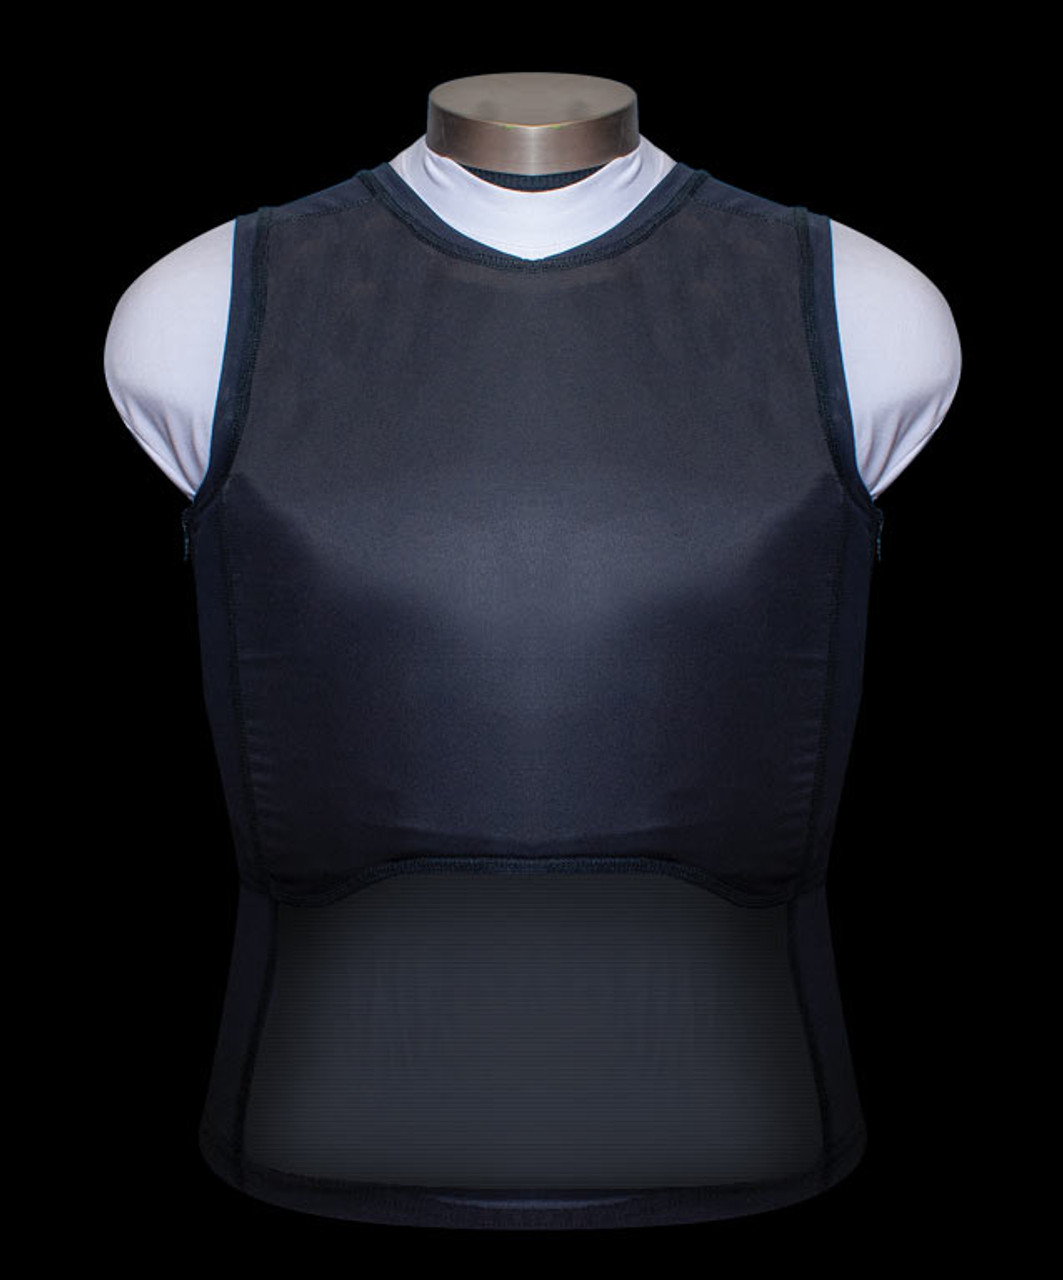 Point Blank Compression Shirt Carrier Male Hidden Ballistic Body Armor Vest, For Military and Police, Available with NIJ .06 Level II and IIIA Ballistic Systems